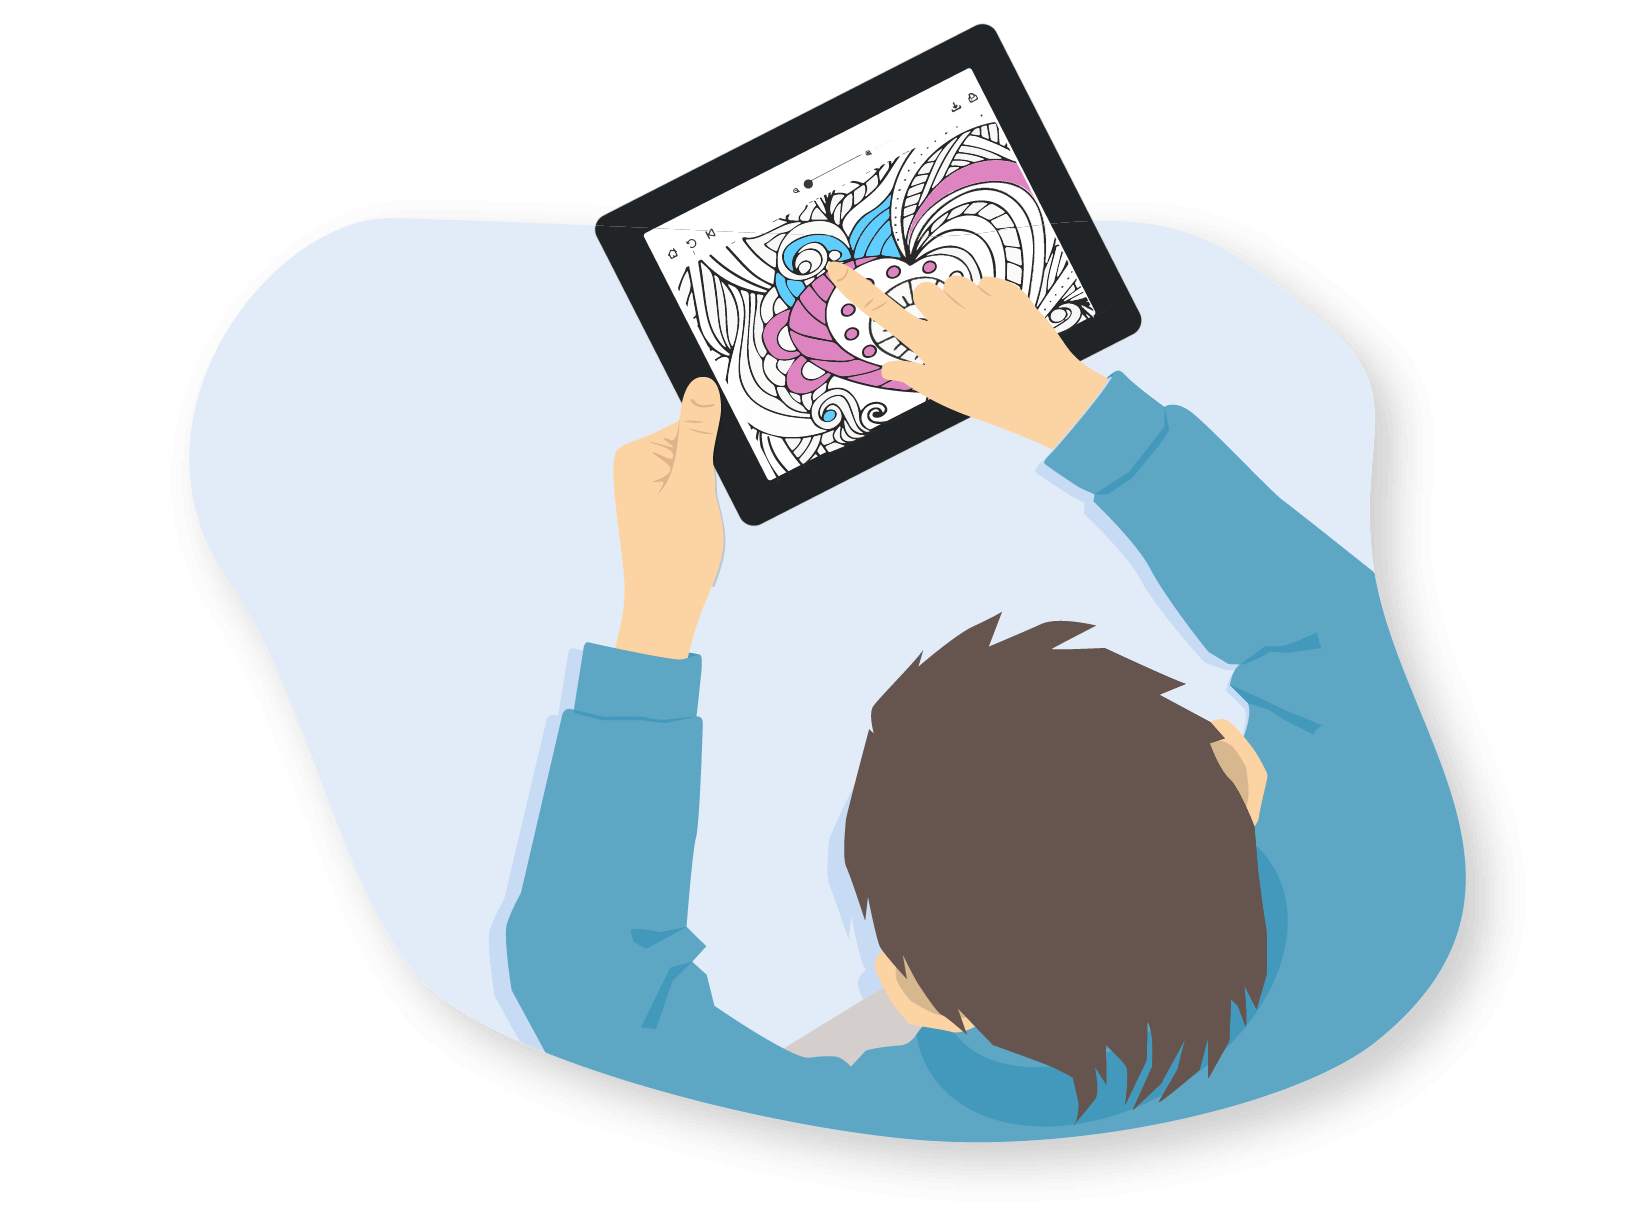 Illustration of a young person colouring on a tablet